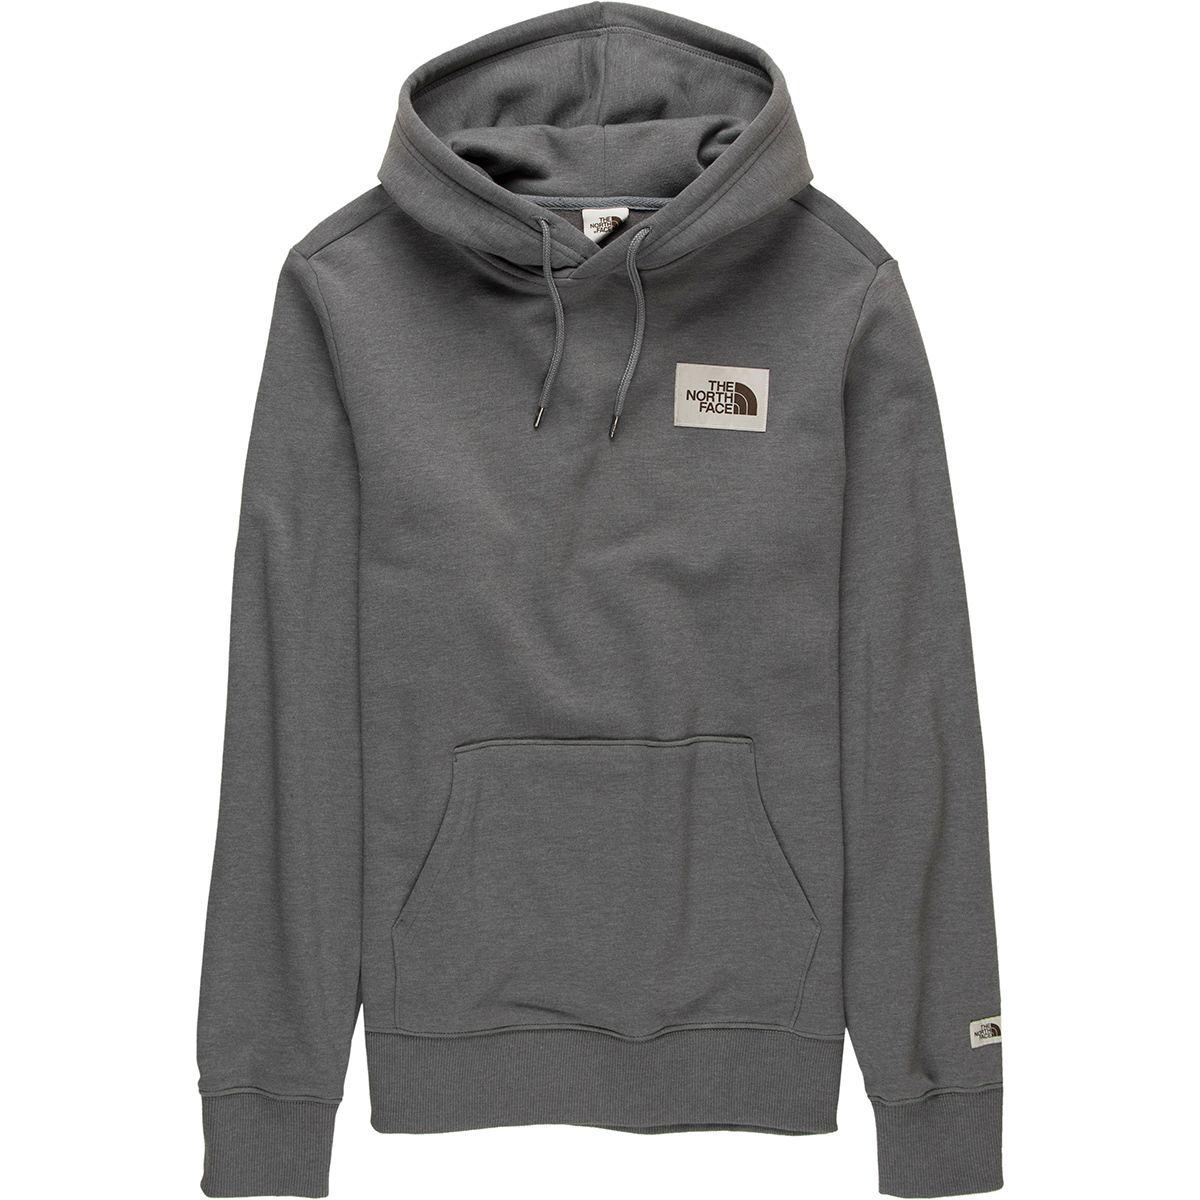 The North Face Cotton Patch Pullover Hoodie in Gray for Men - Lyst